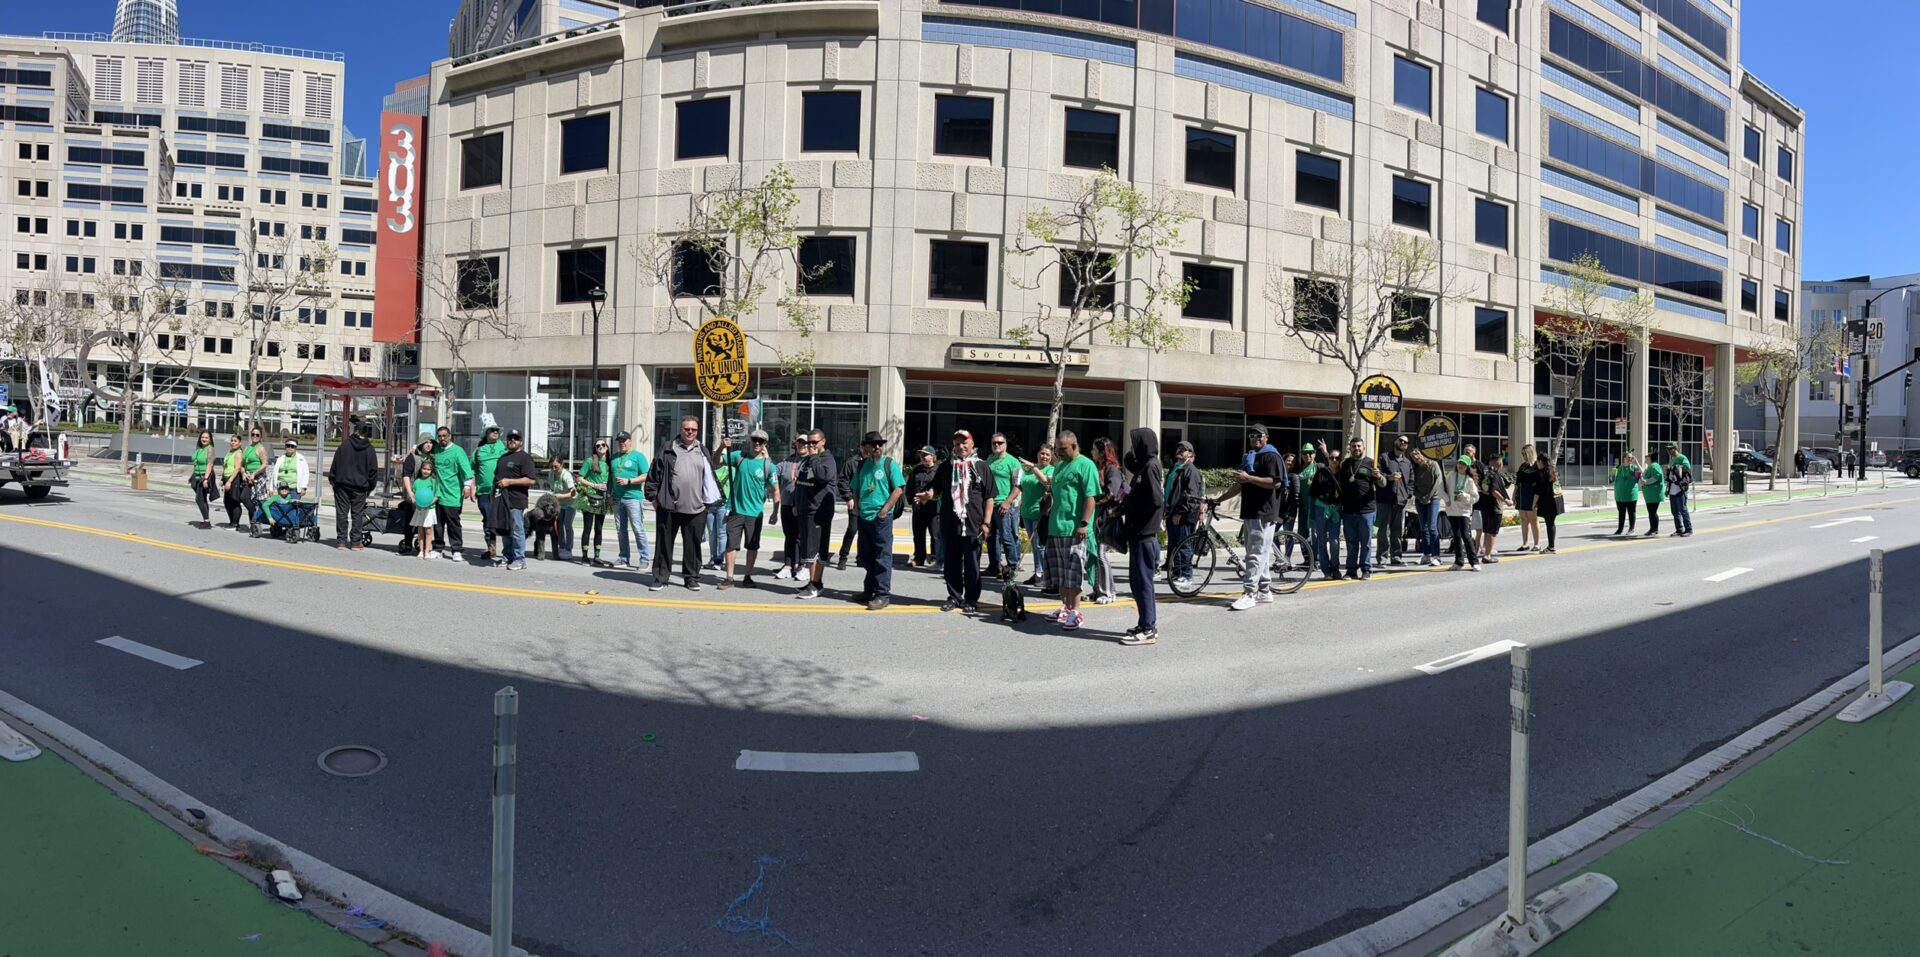 Image from the Gallery: St. Patrick’s Day Parade